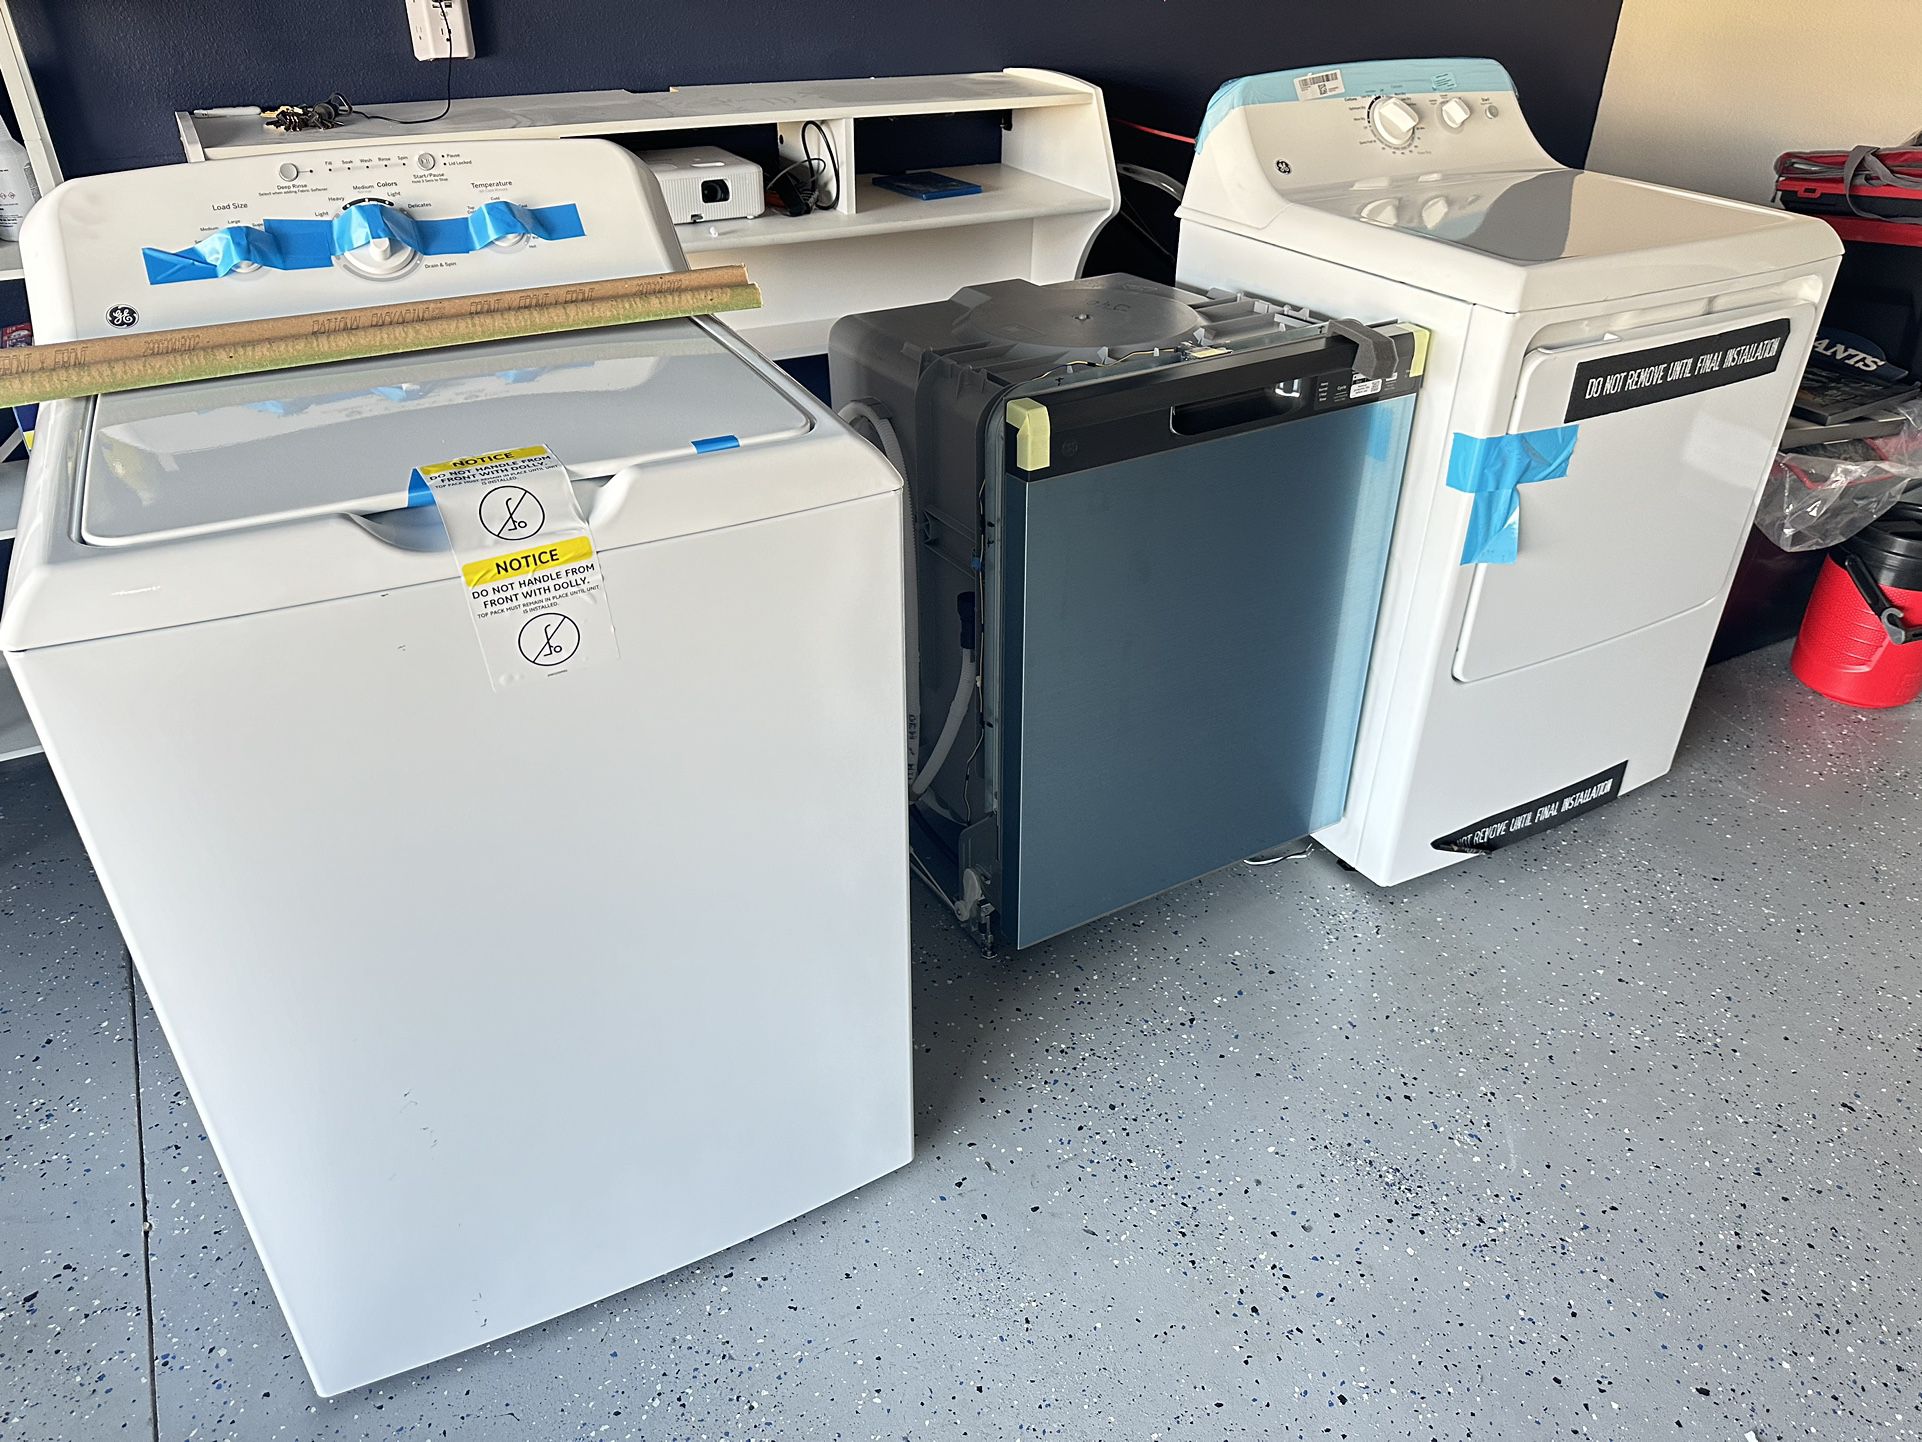 GE Washer And Dryer + Dishwasher 